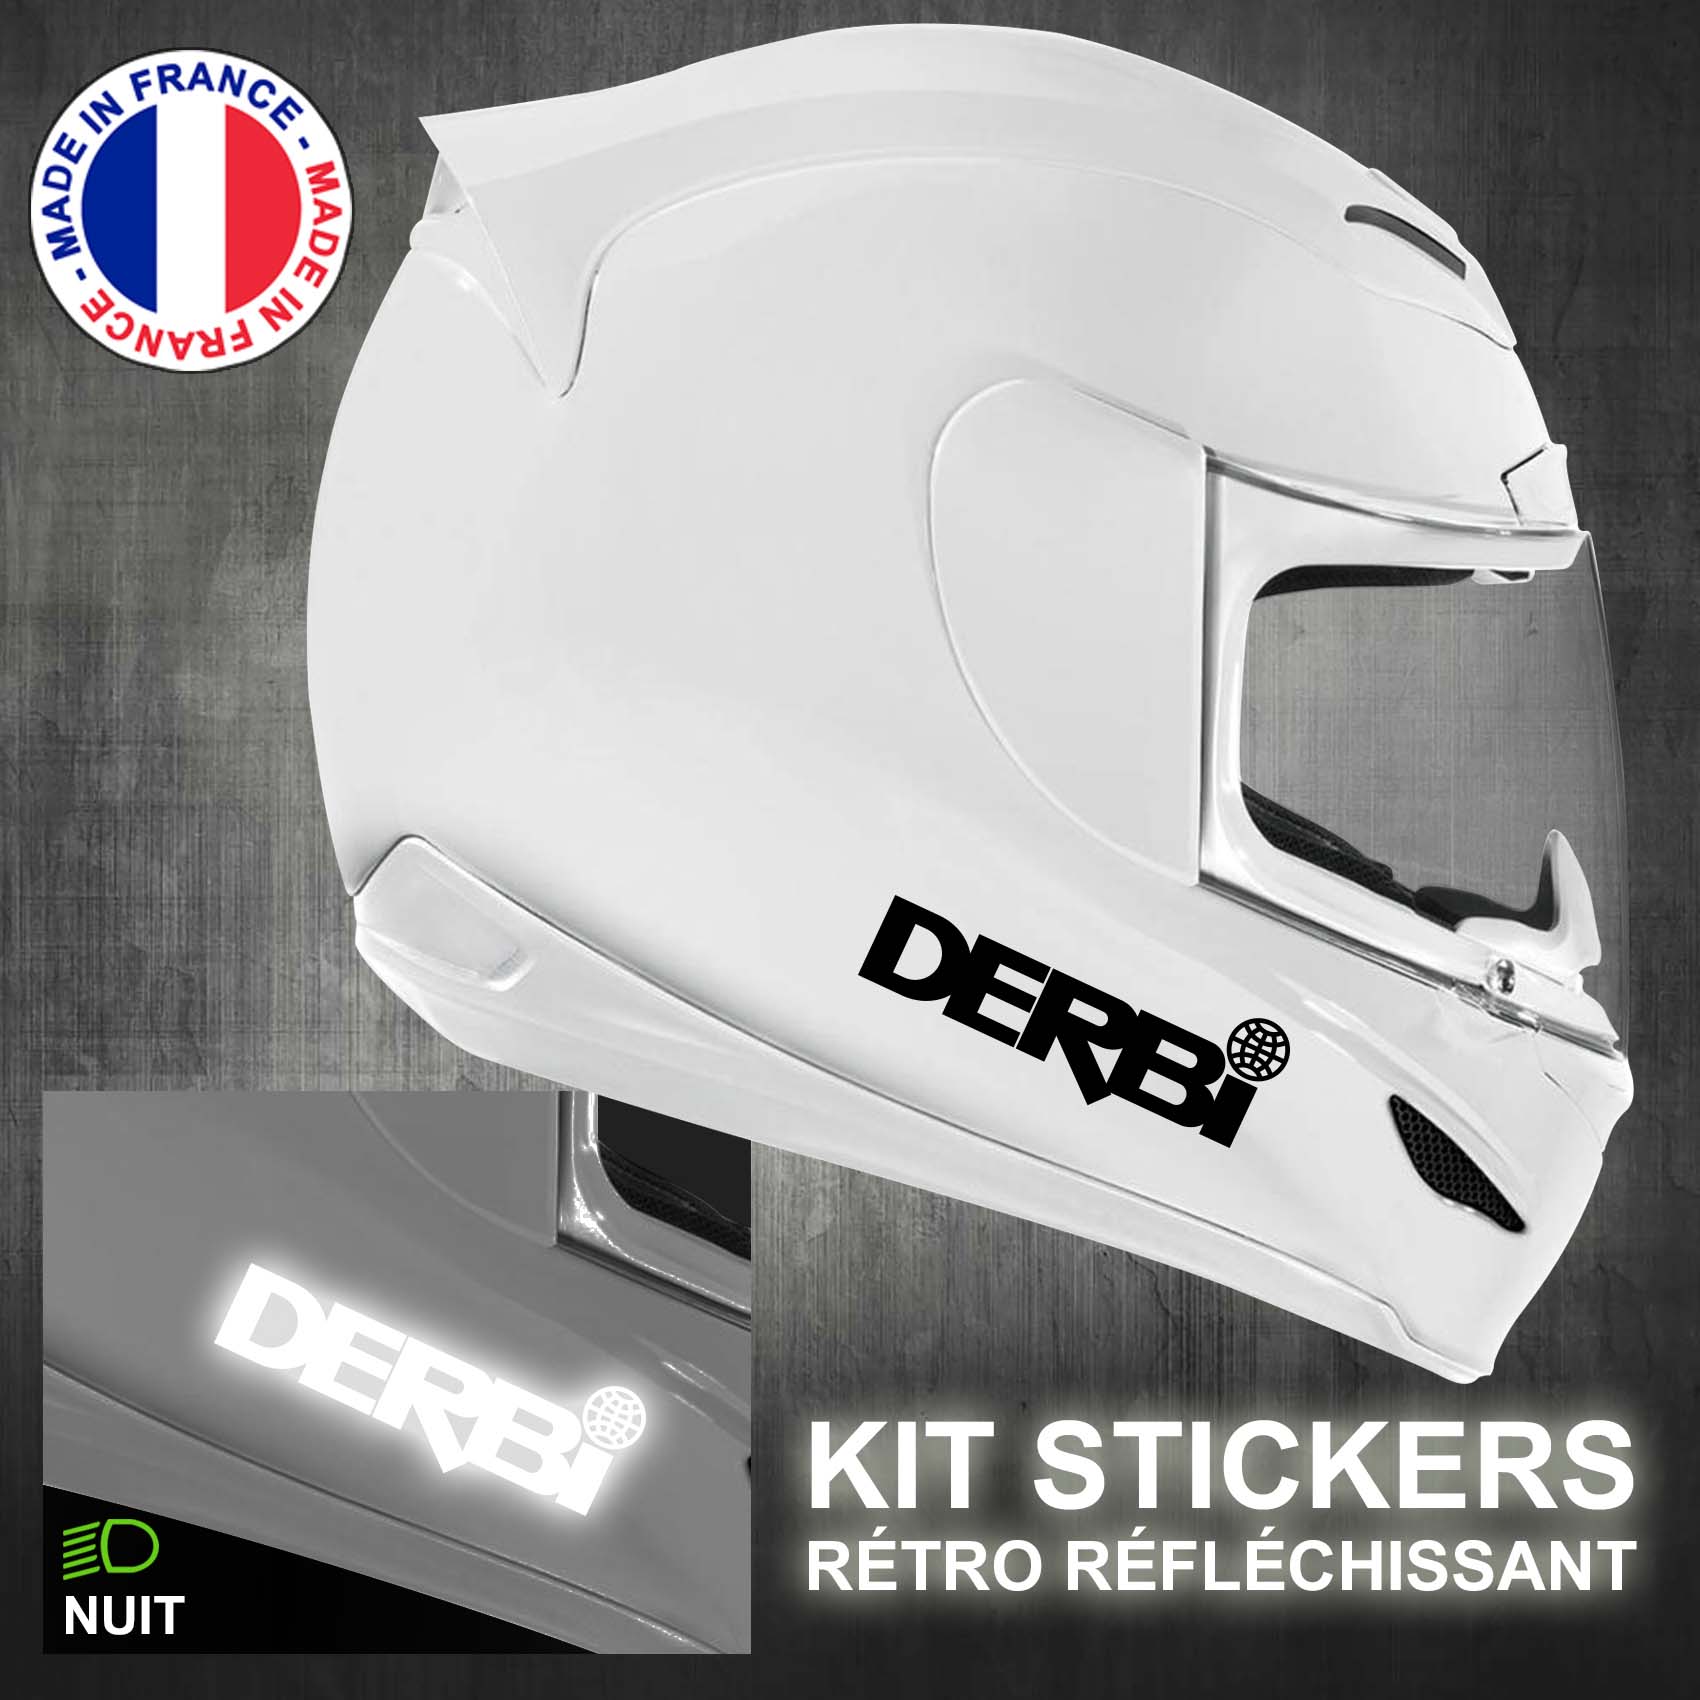 stickers-casque-moto-derbi-ref3-retro-reflechissant-autocollant-blanc-moto-velo-tuning-racing-route-sticker-casques-adhesif-scooter-nuit-securite-decals-personnalise-personnalisable-min